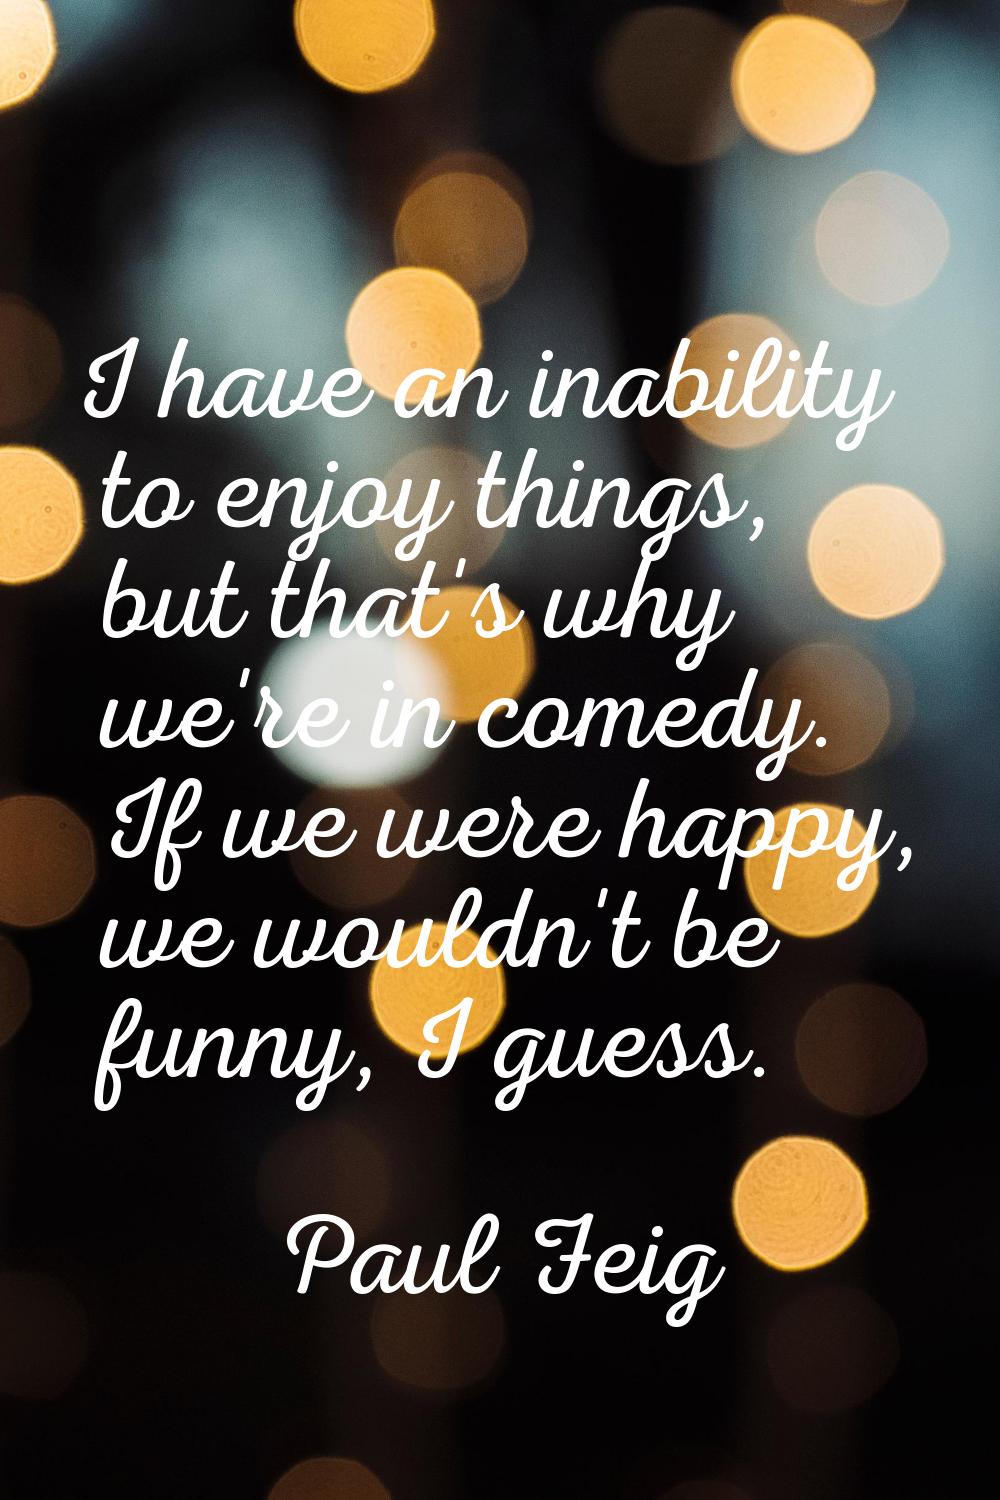 I have an inability to enjoy things, but that's why we're in comedy. If we were happy, we wouldn't 